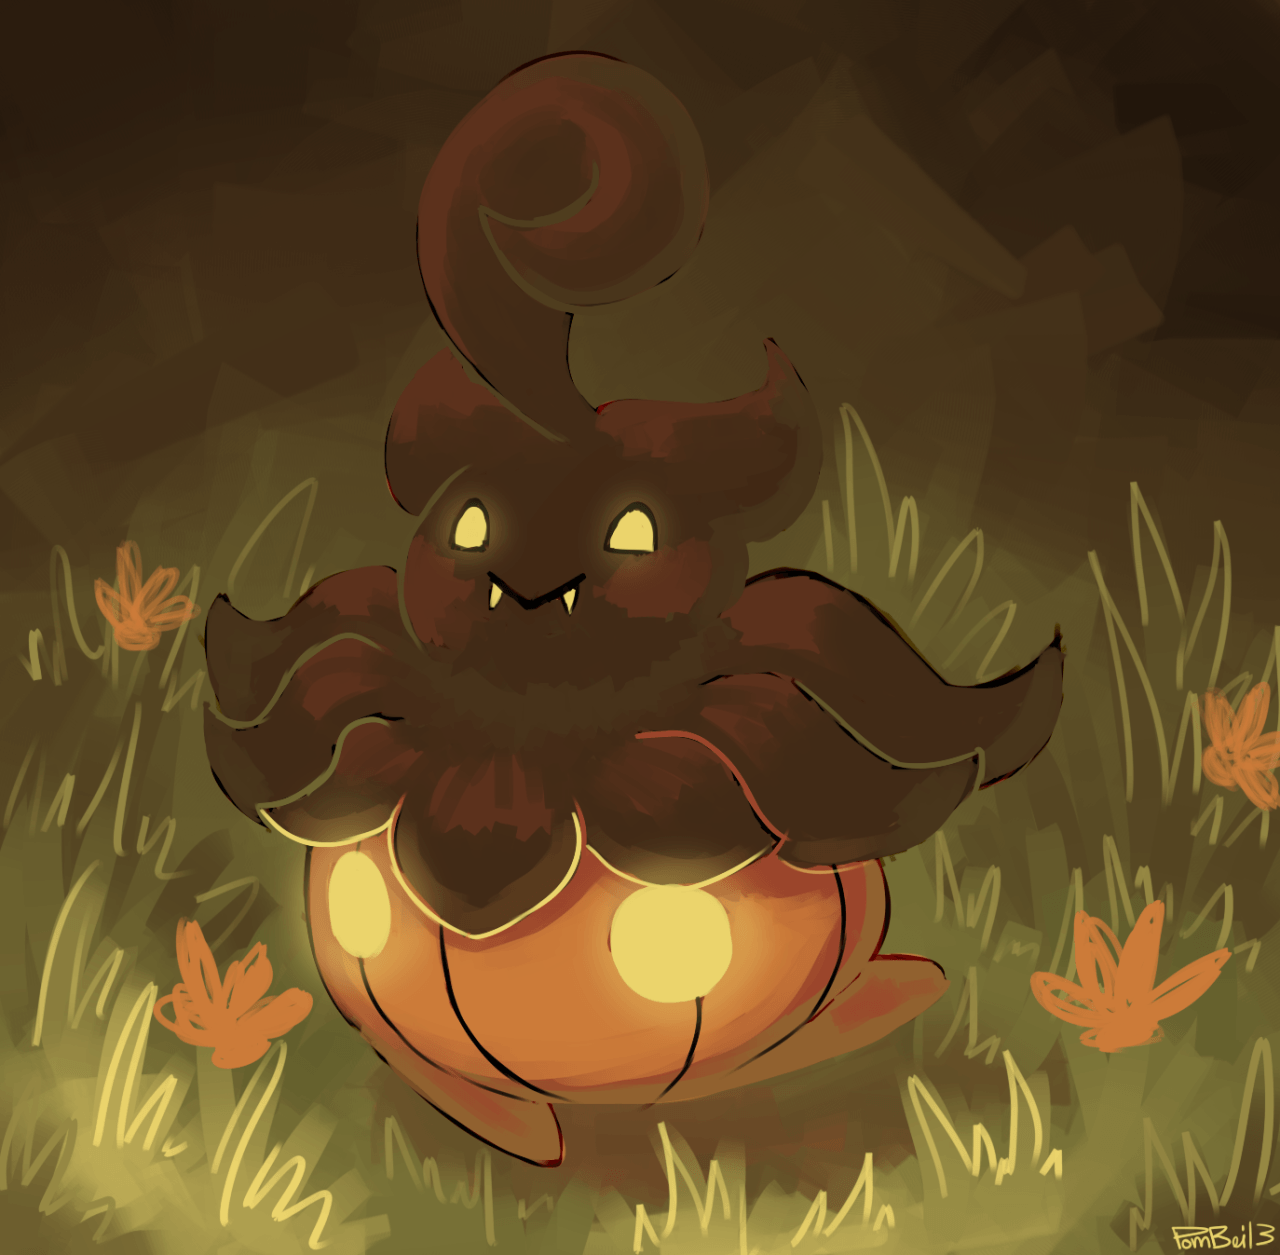 pombei: “YOU DON’T UNDERSTAND HOW MUCH I LOVE PUMPKABOO ”